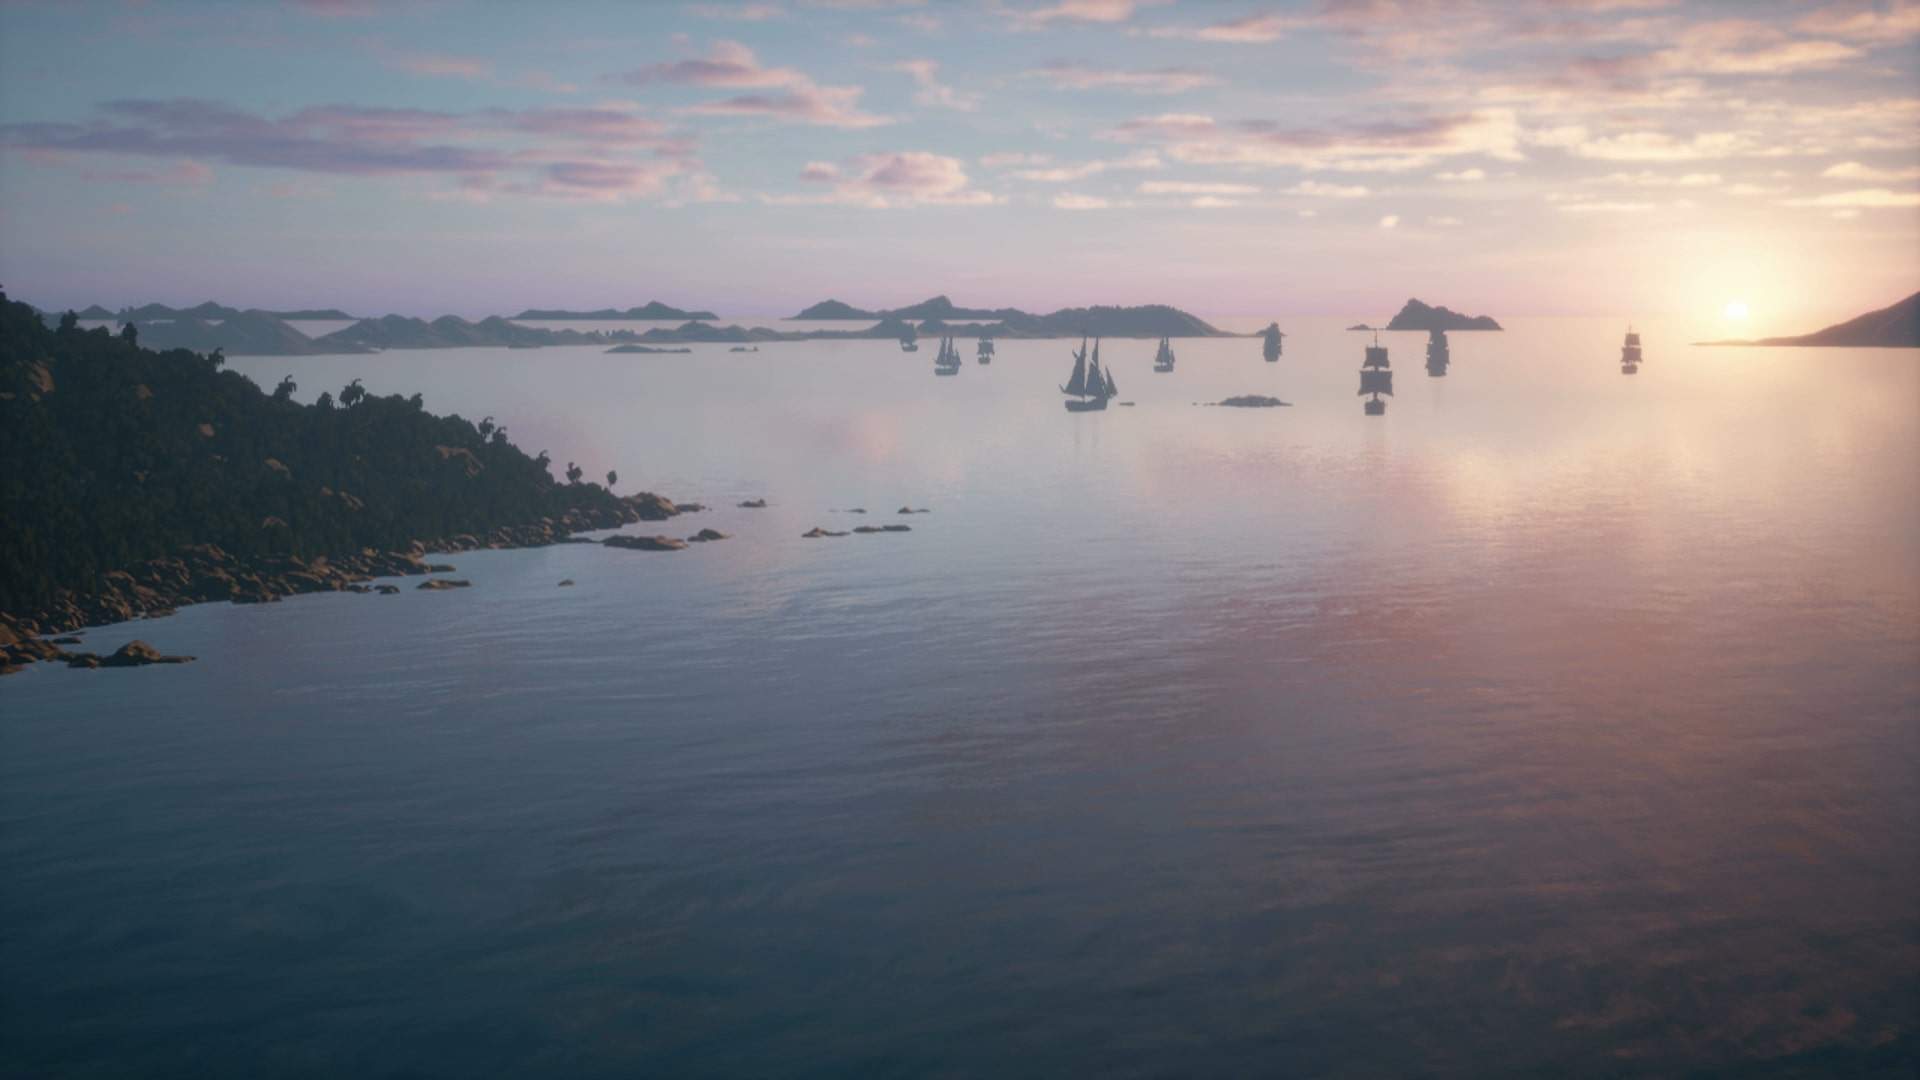 The caribbean with a sunrise and boats in Kingdom Hearts 3